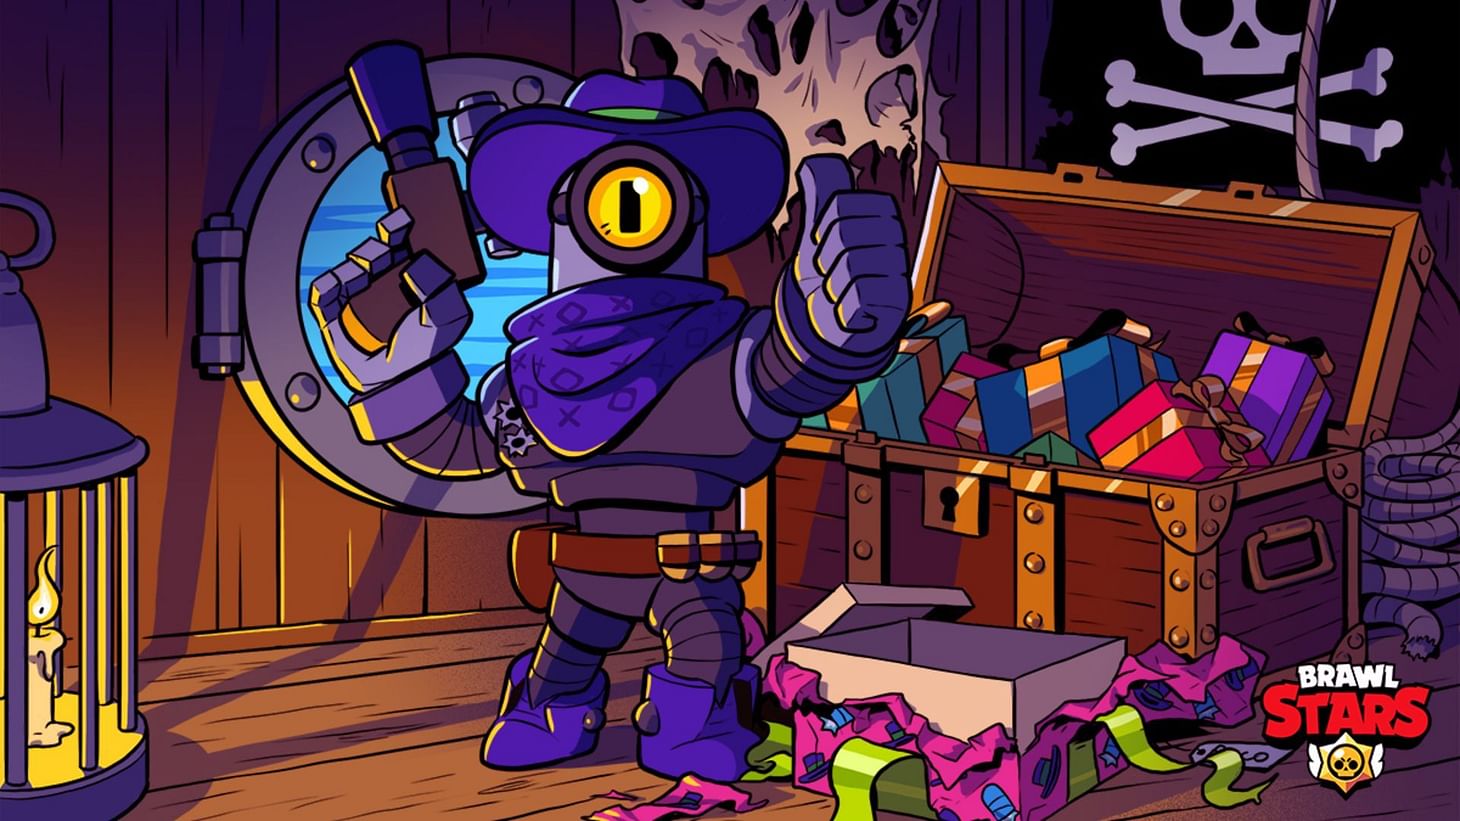 Rico is a formidable adversary. (Image via Supercell)